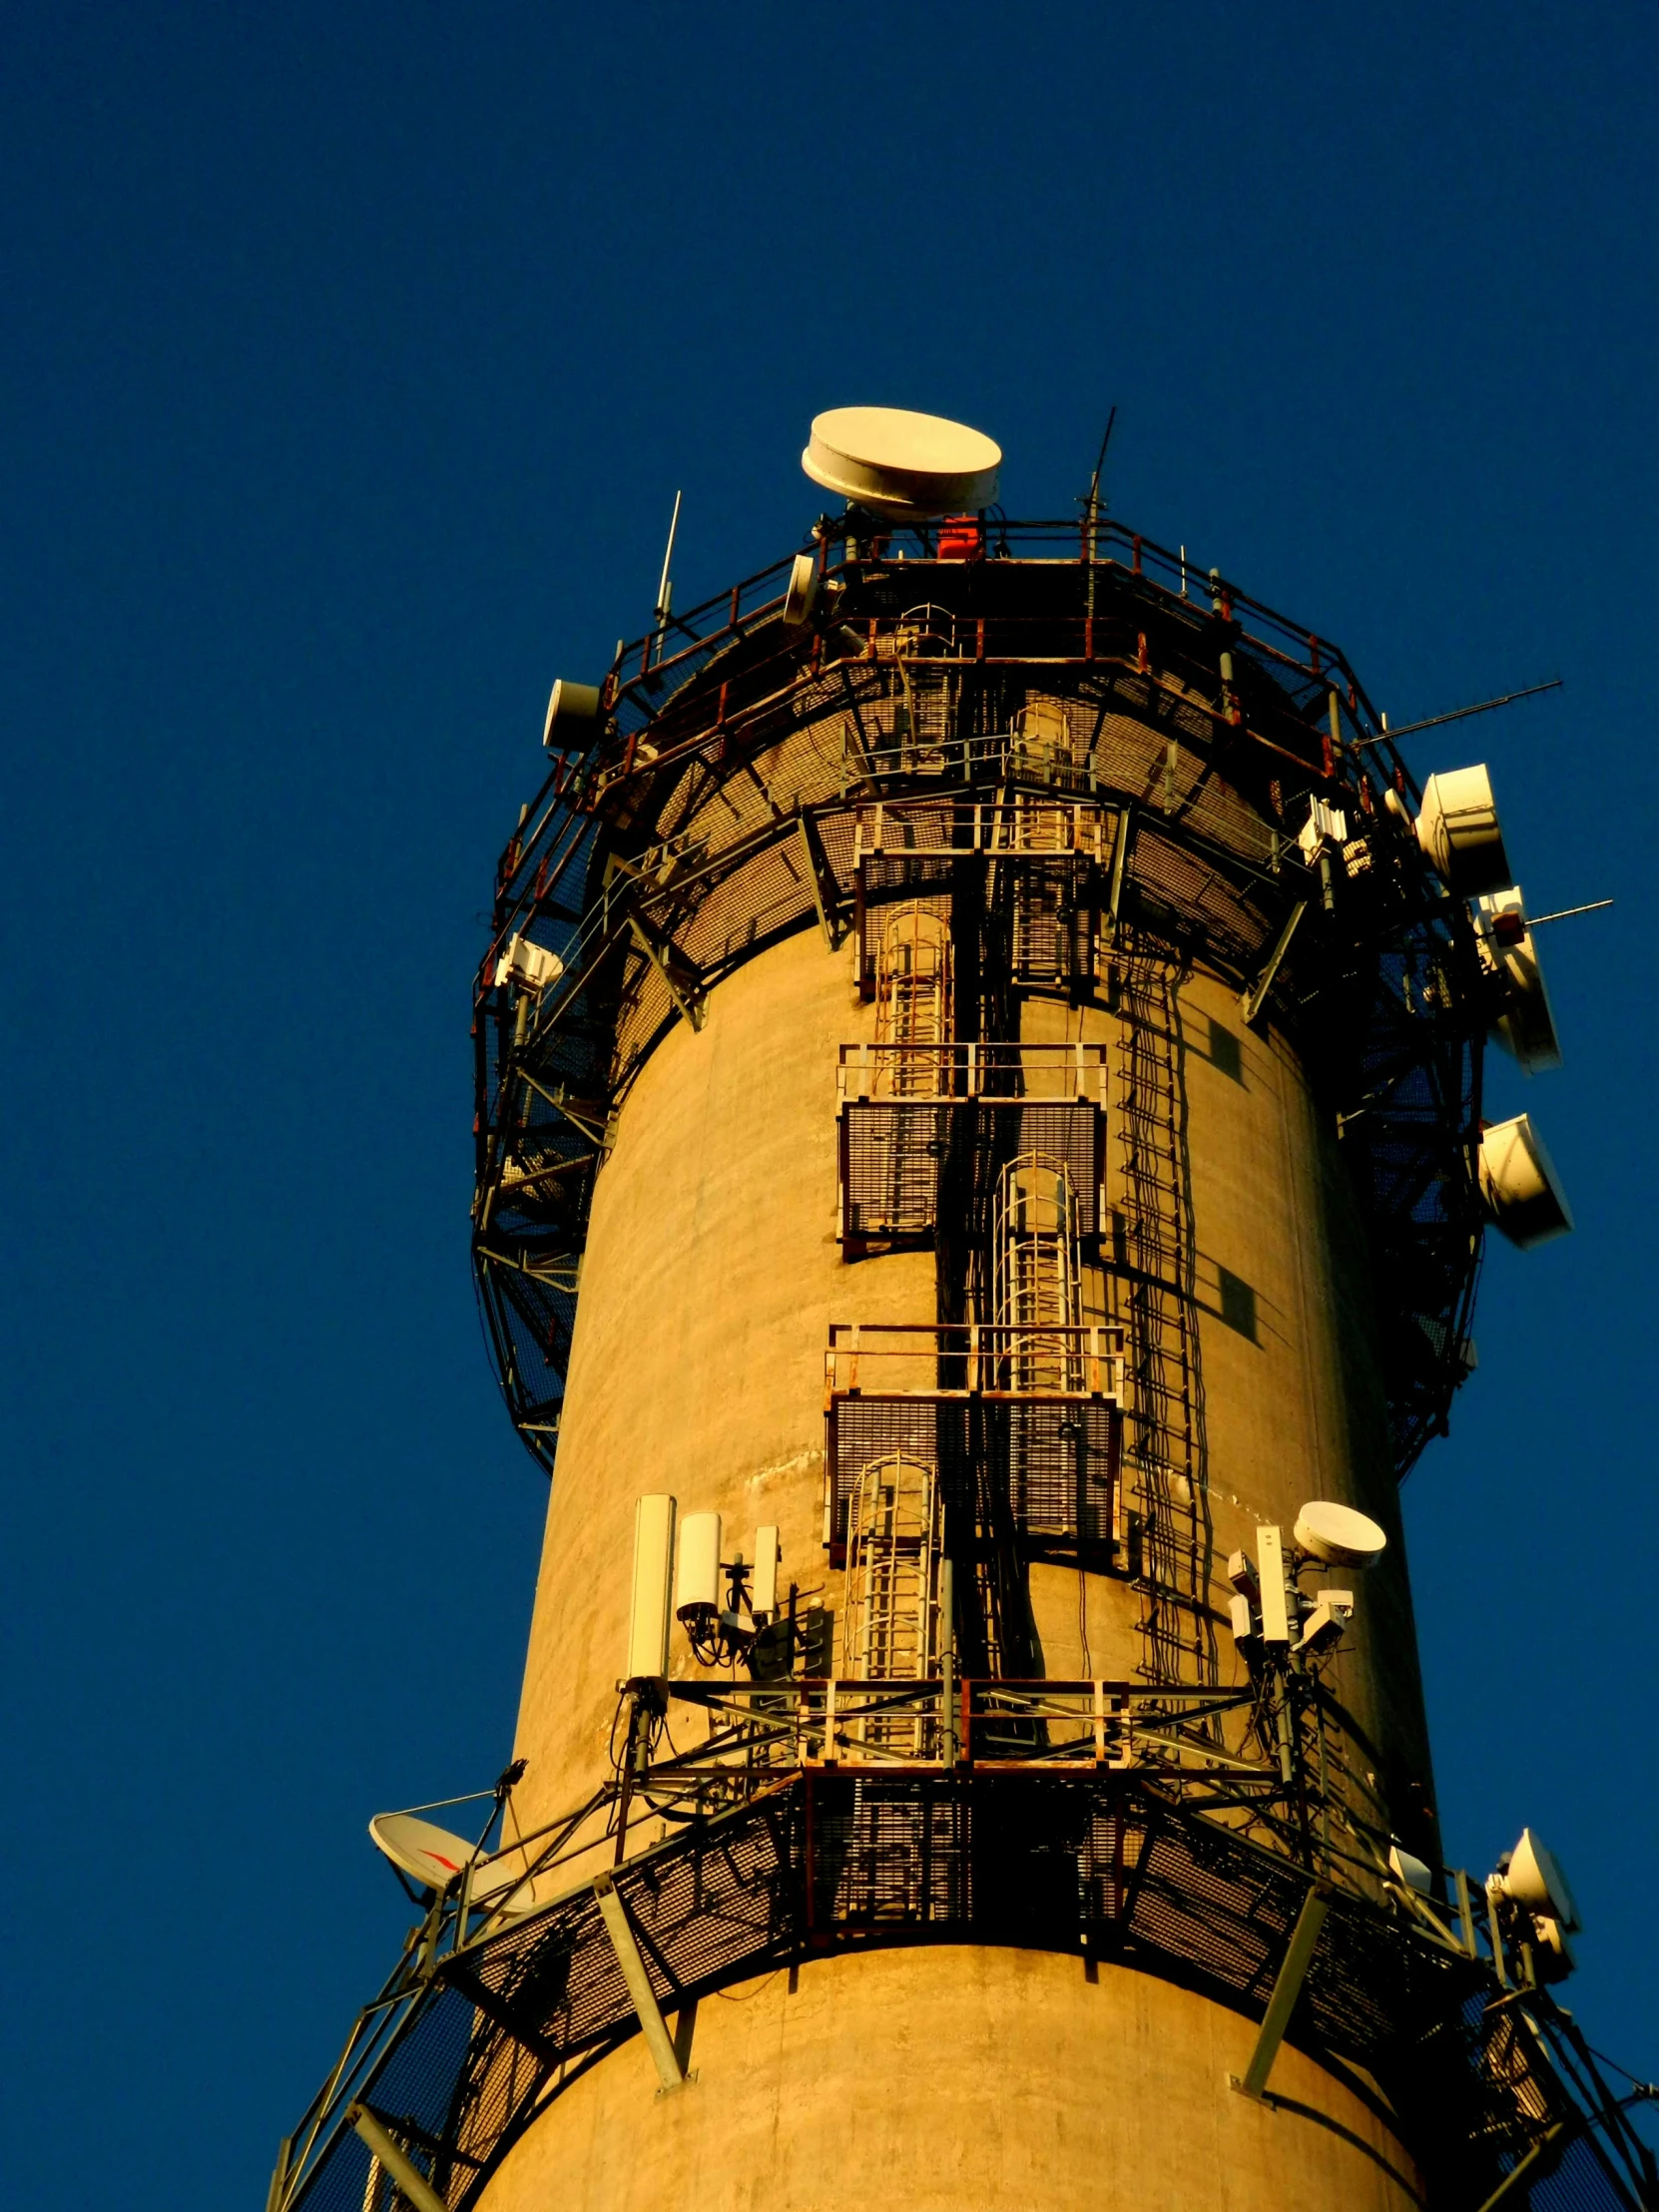 an old rusty, yellow and blue tower is seen with multiple wires on the sides